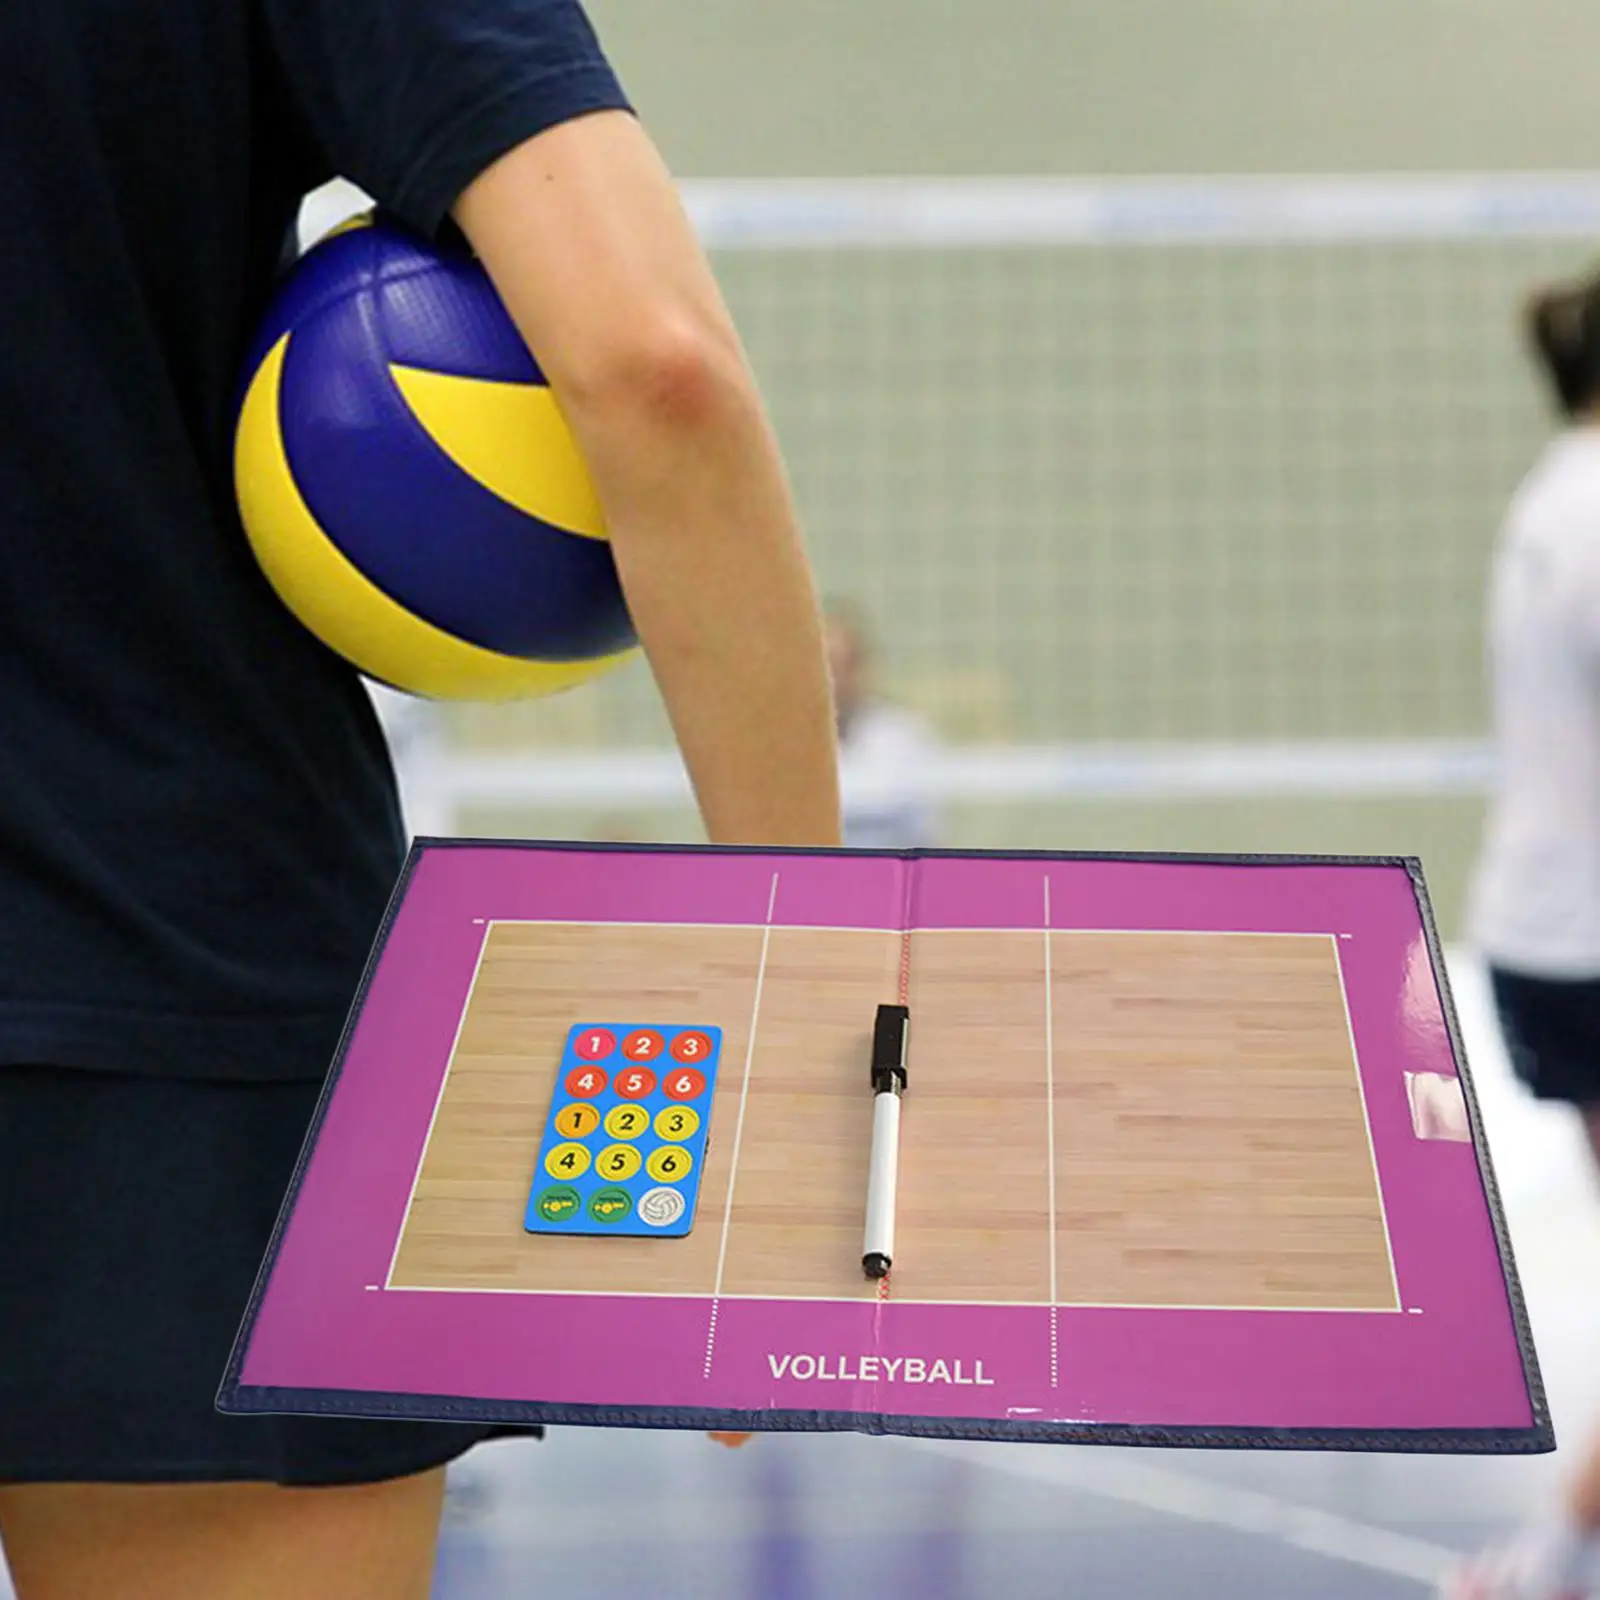 VolksRose Volleyball Coaching Board Coach Training Equipment for Teaching and Game Plan Demonstration Coaches Clipboard Kit with Magnets and Marker Pen Magnetic Volleyball Tactics Strategy Board 